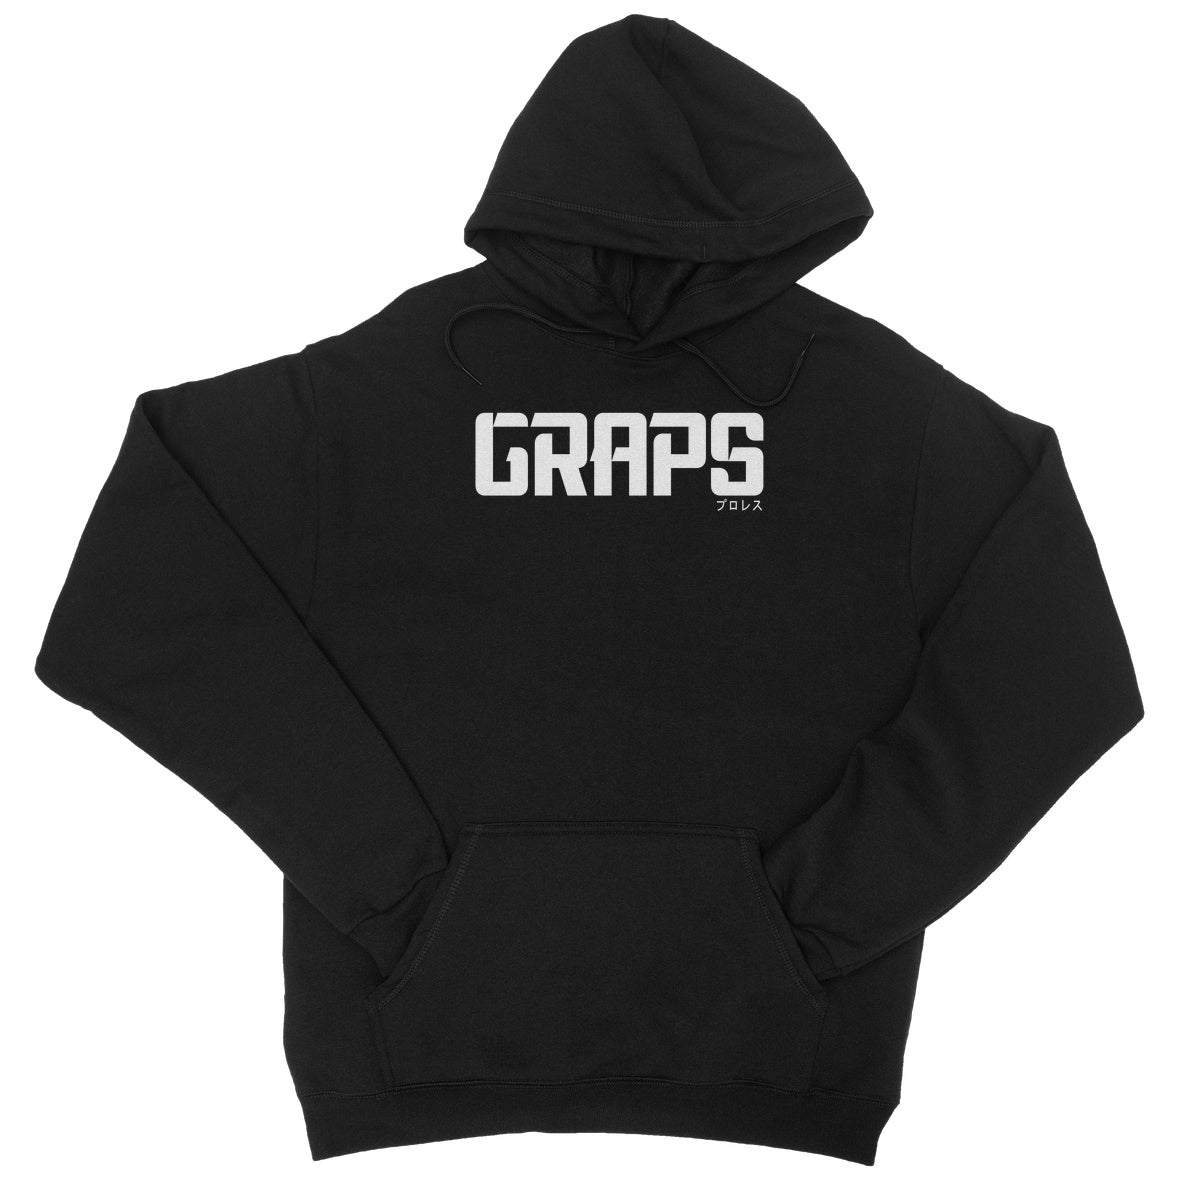 GRAPS White College Hoodie